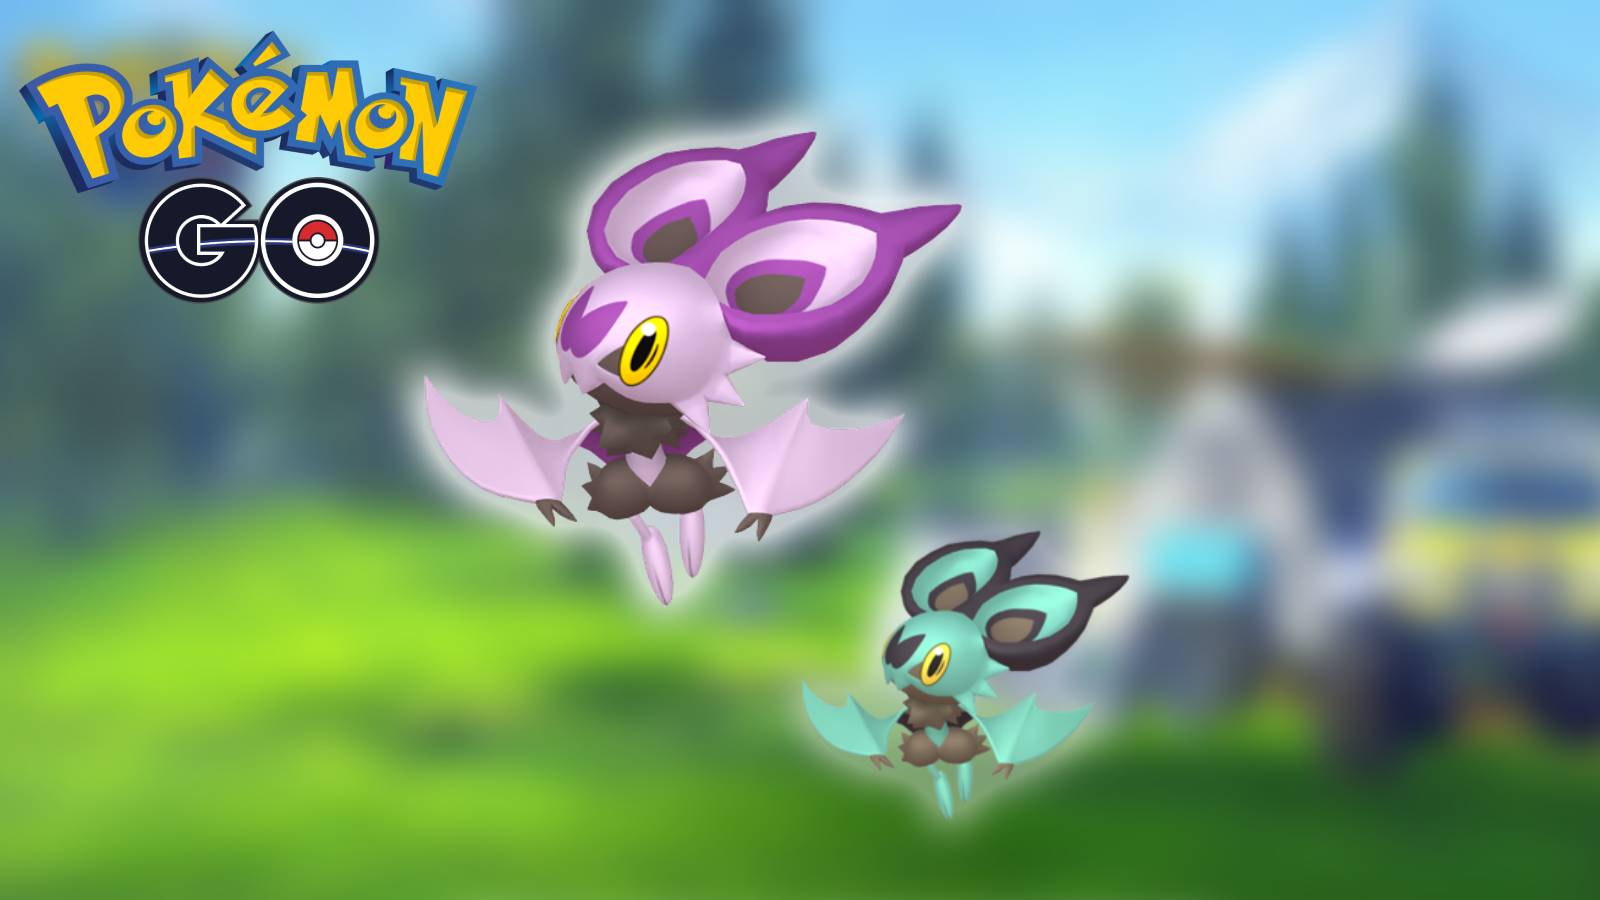 The Pokemon Noibat appears against a blurred background